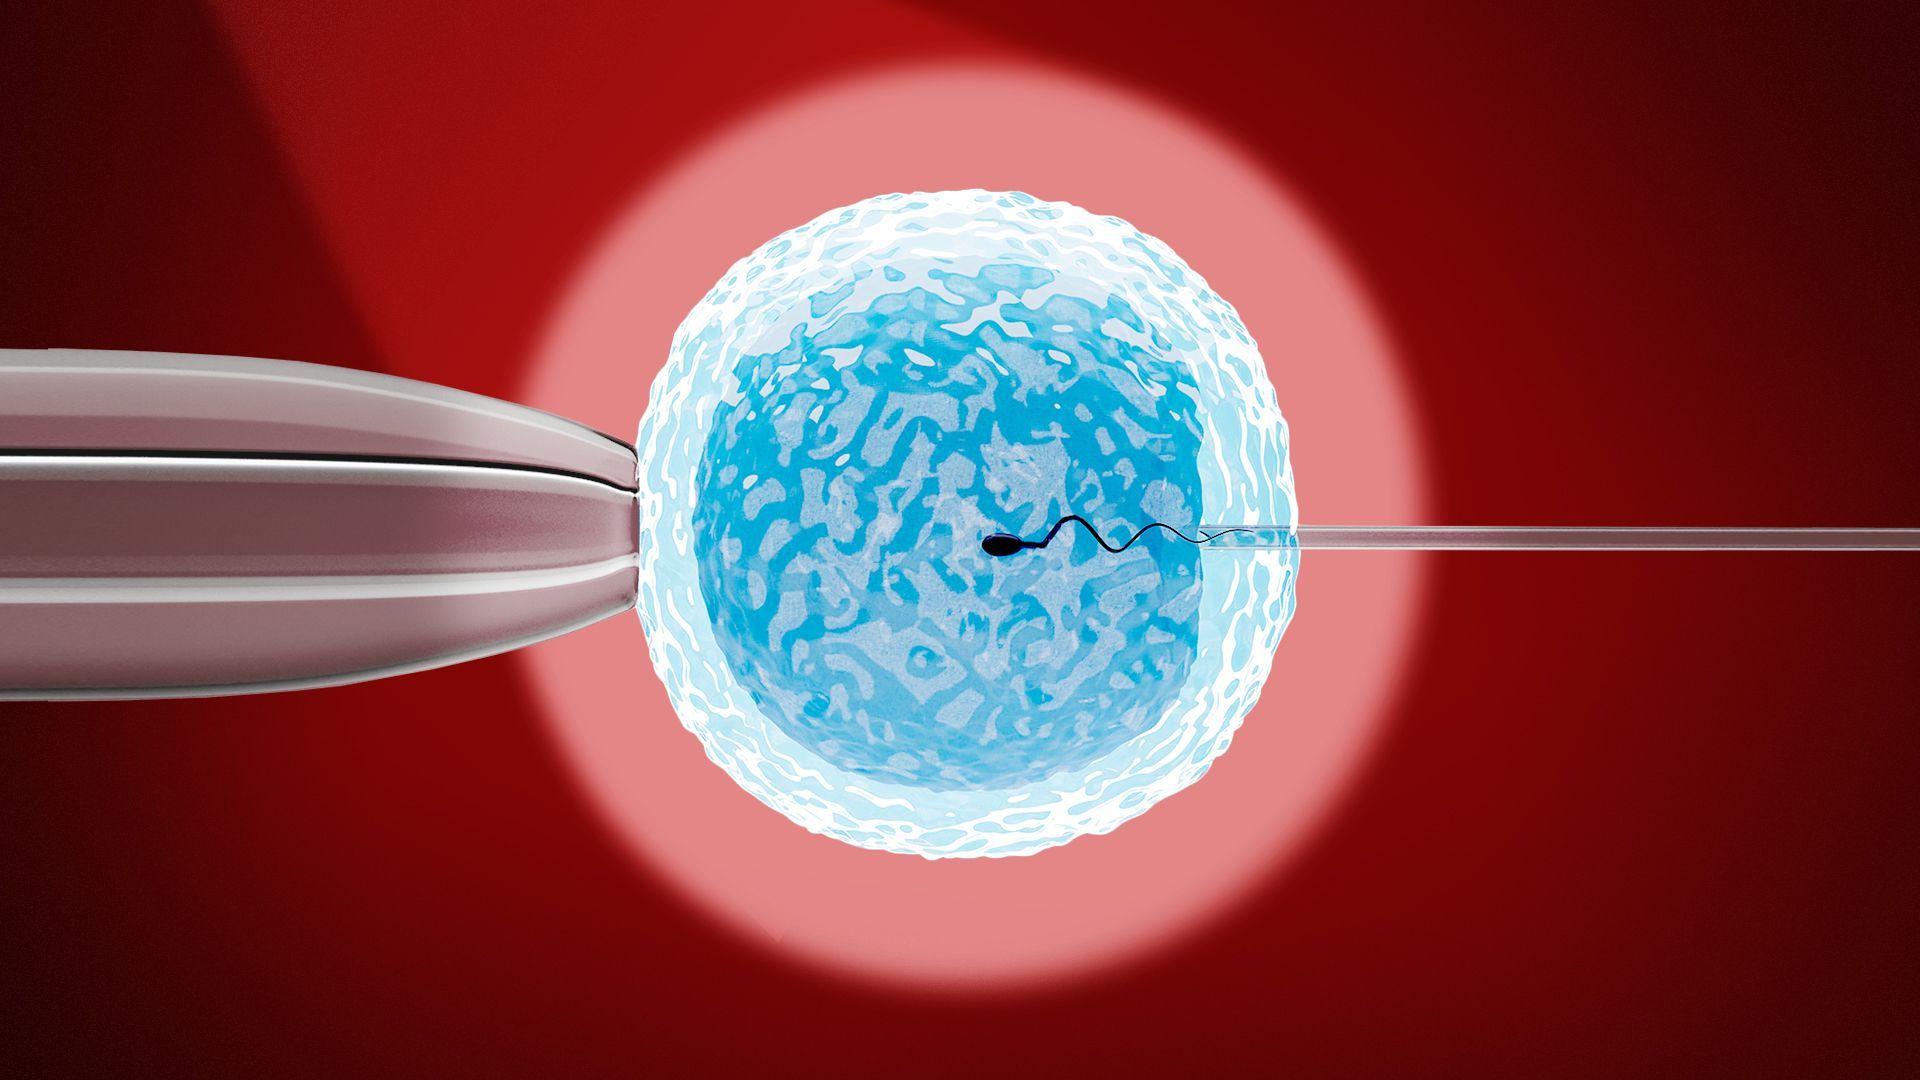 Illustration of a spotlight shining on an IVF injection close up.